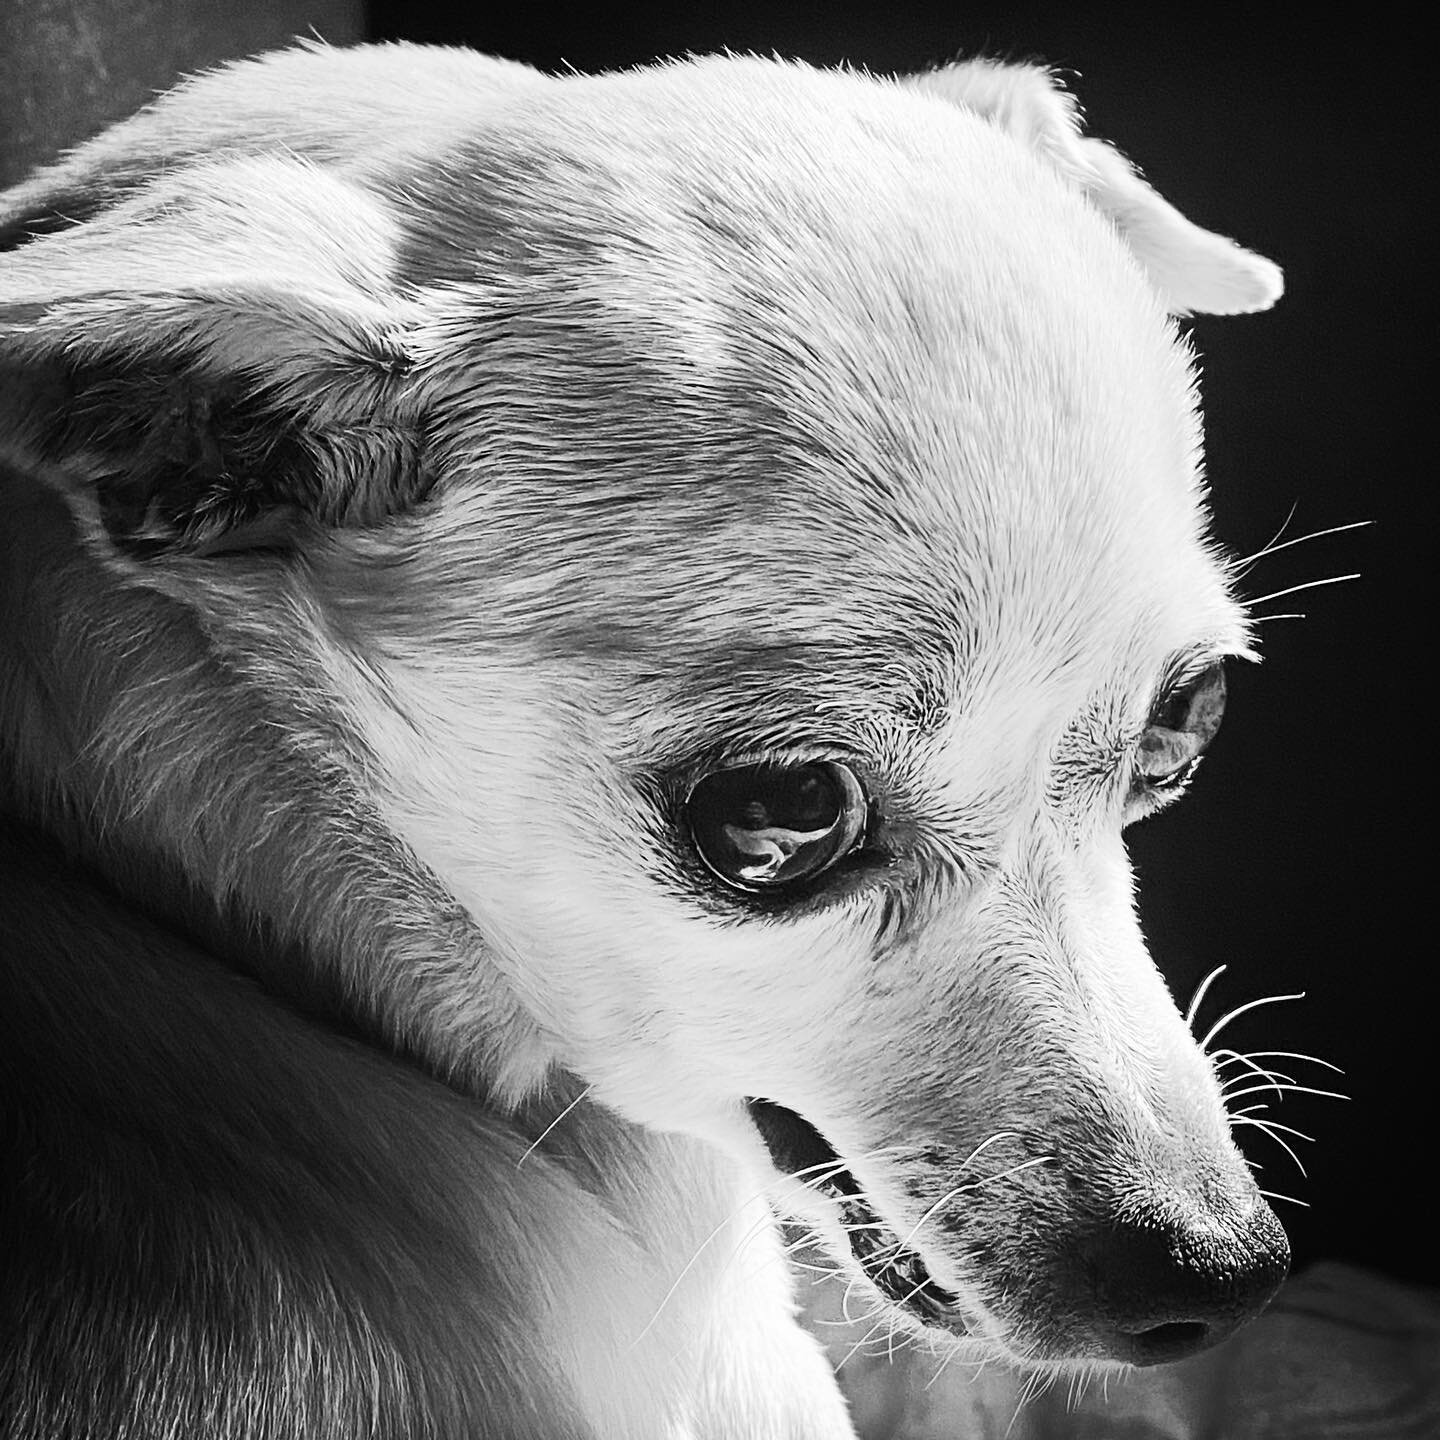 Anjou Afternoon. #chihuahua #bwphotography #dogdayafternoon #dogsofinstagram